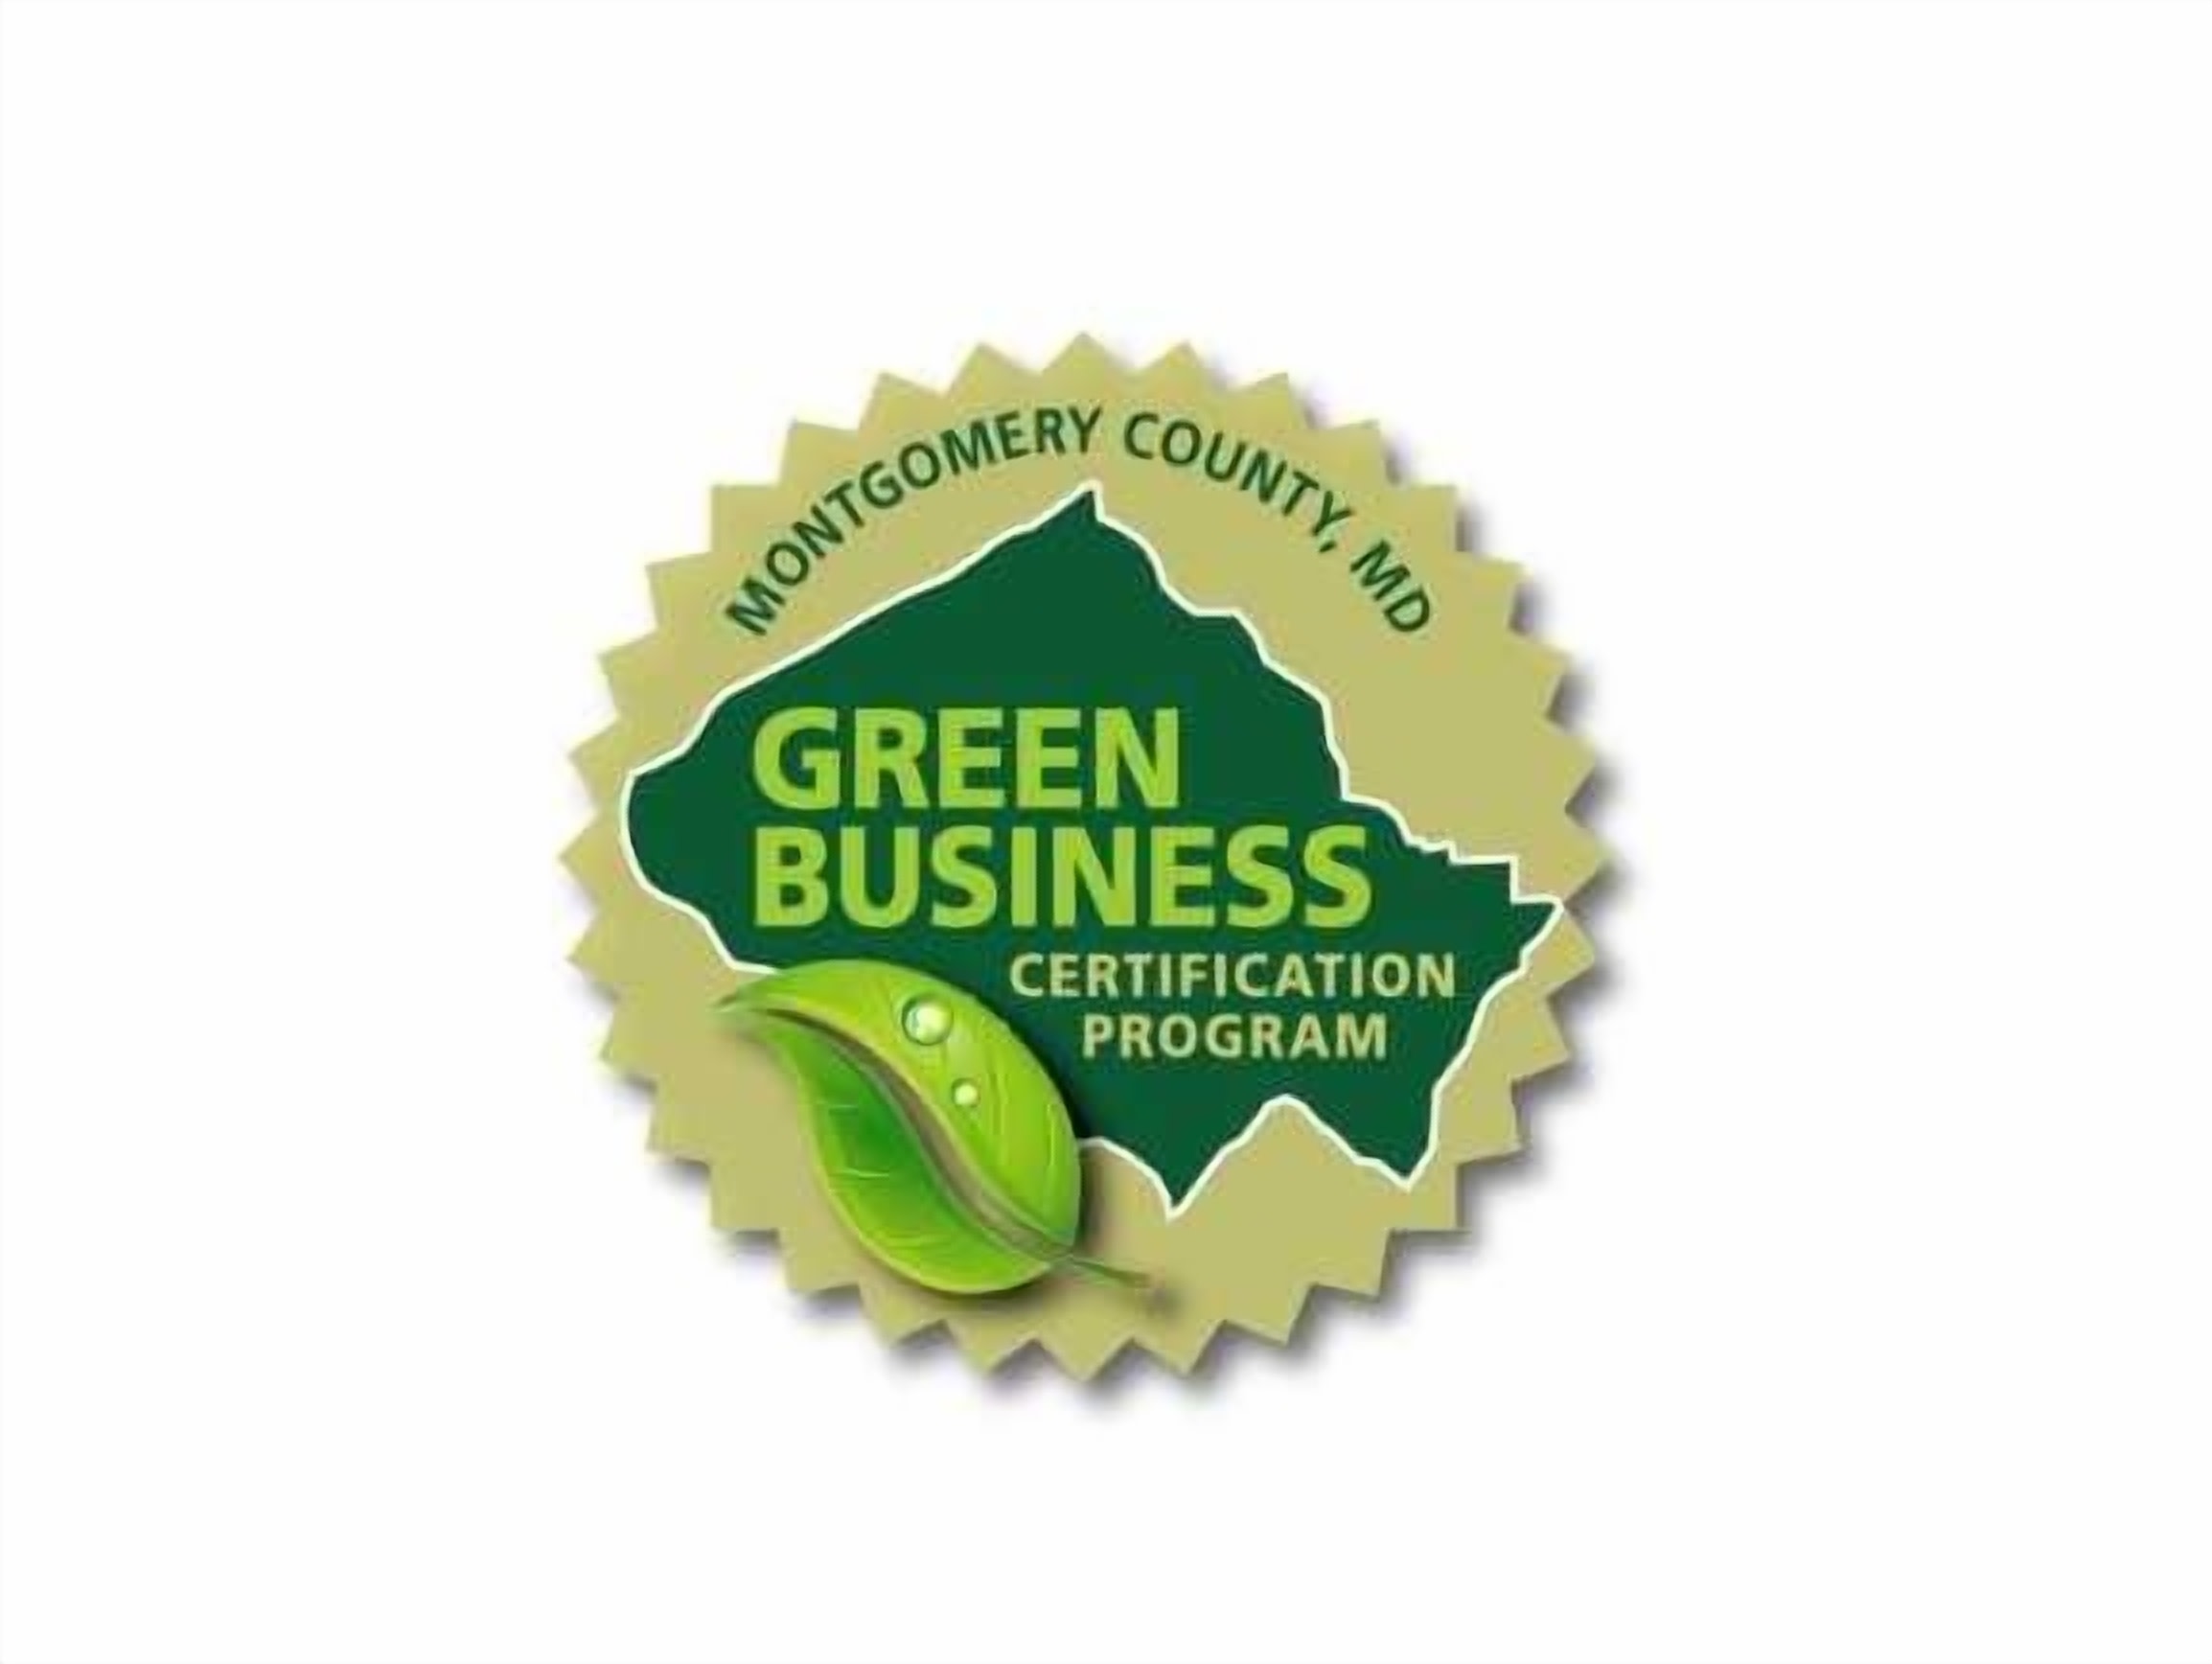 KnowESG_Montgomery County Relaunches Green Business Programme